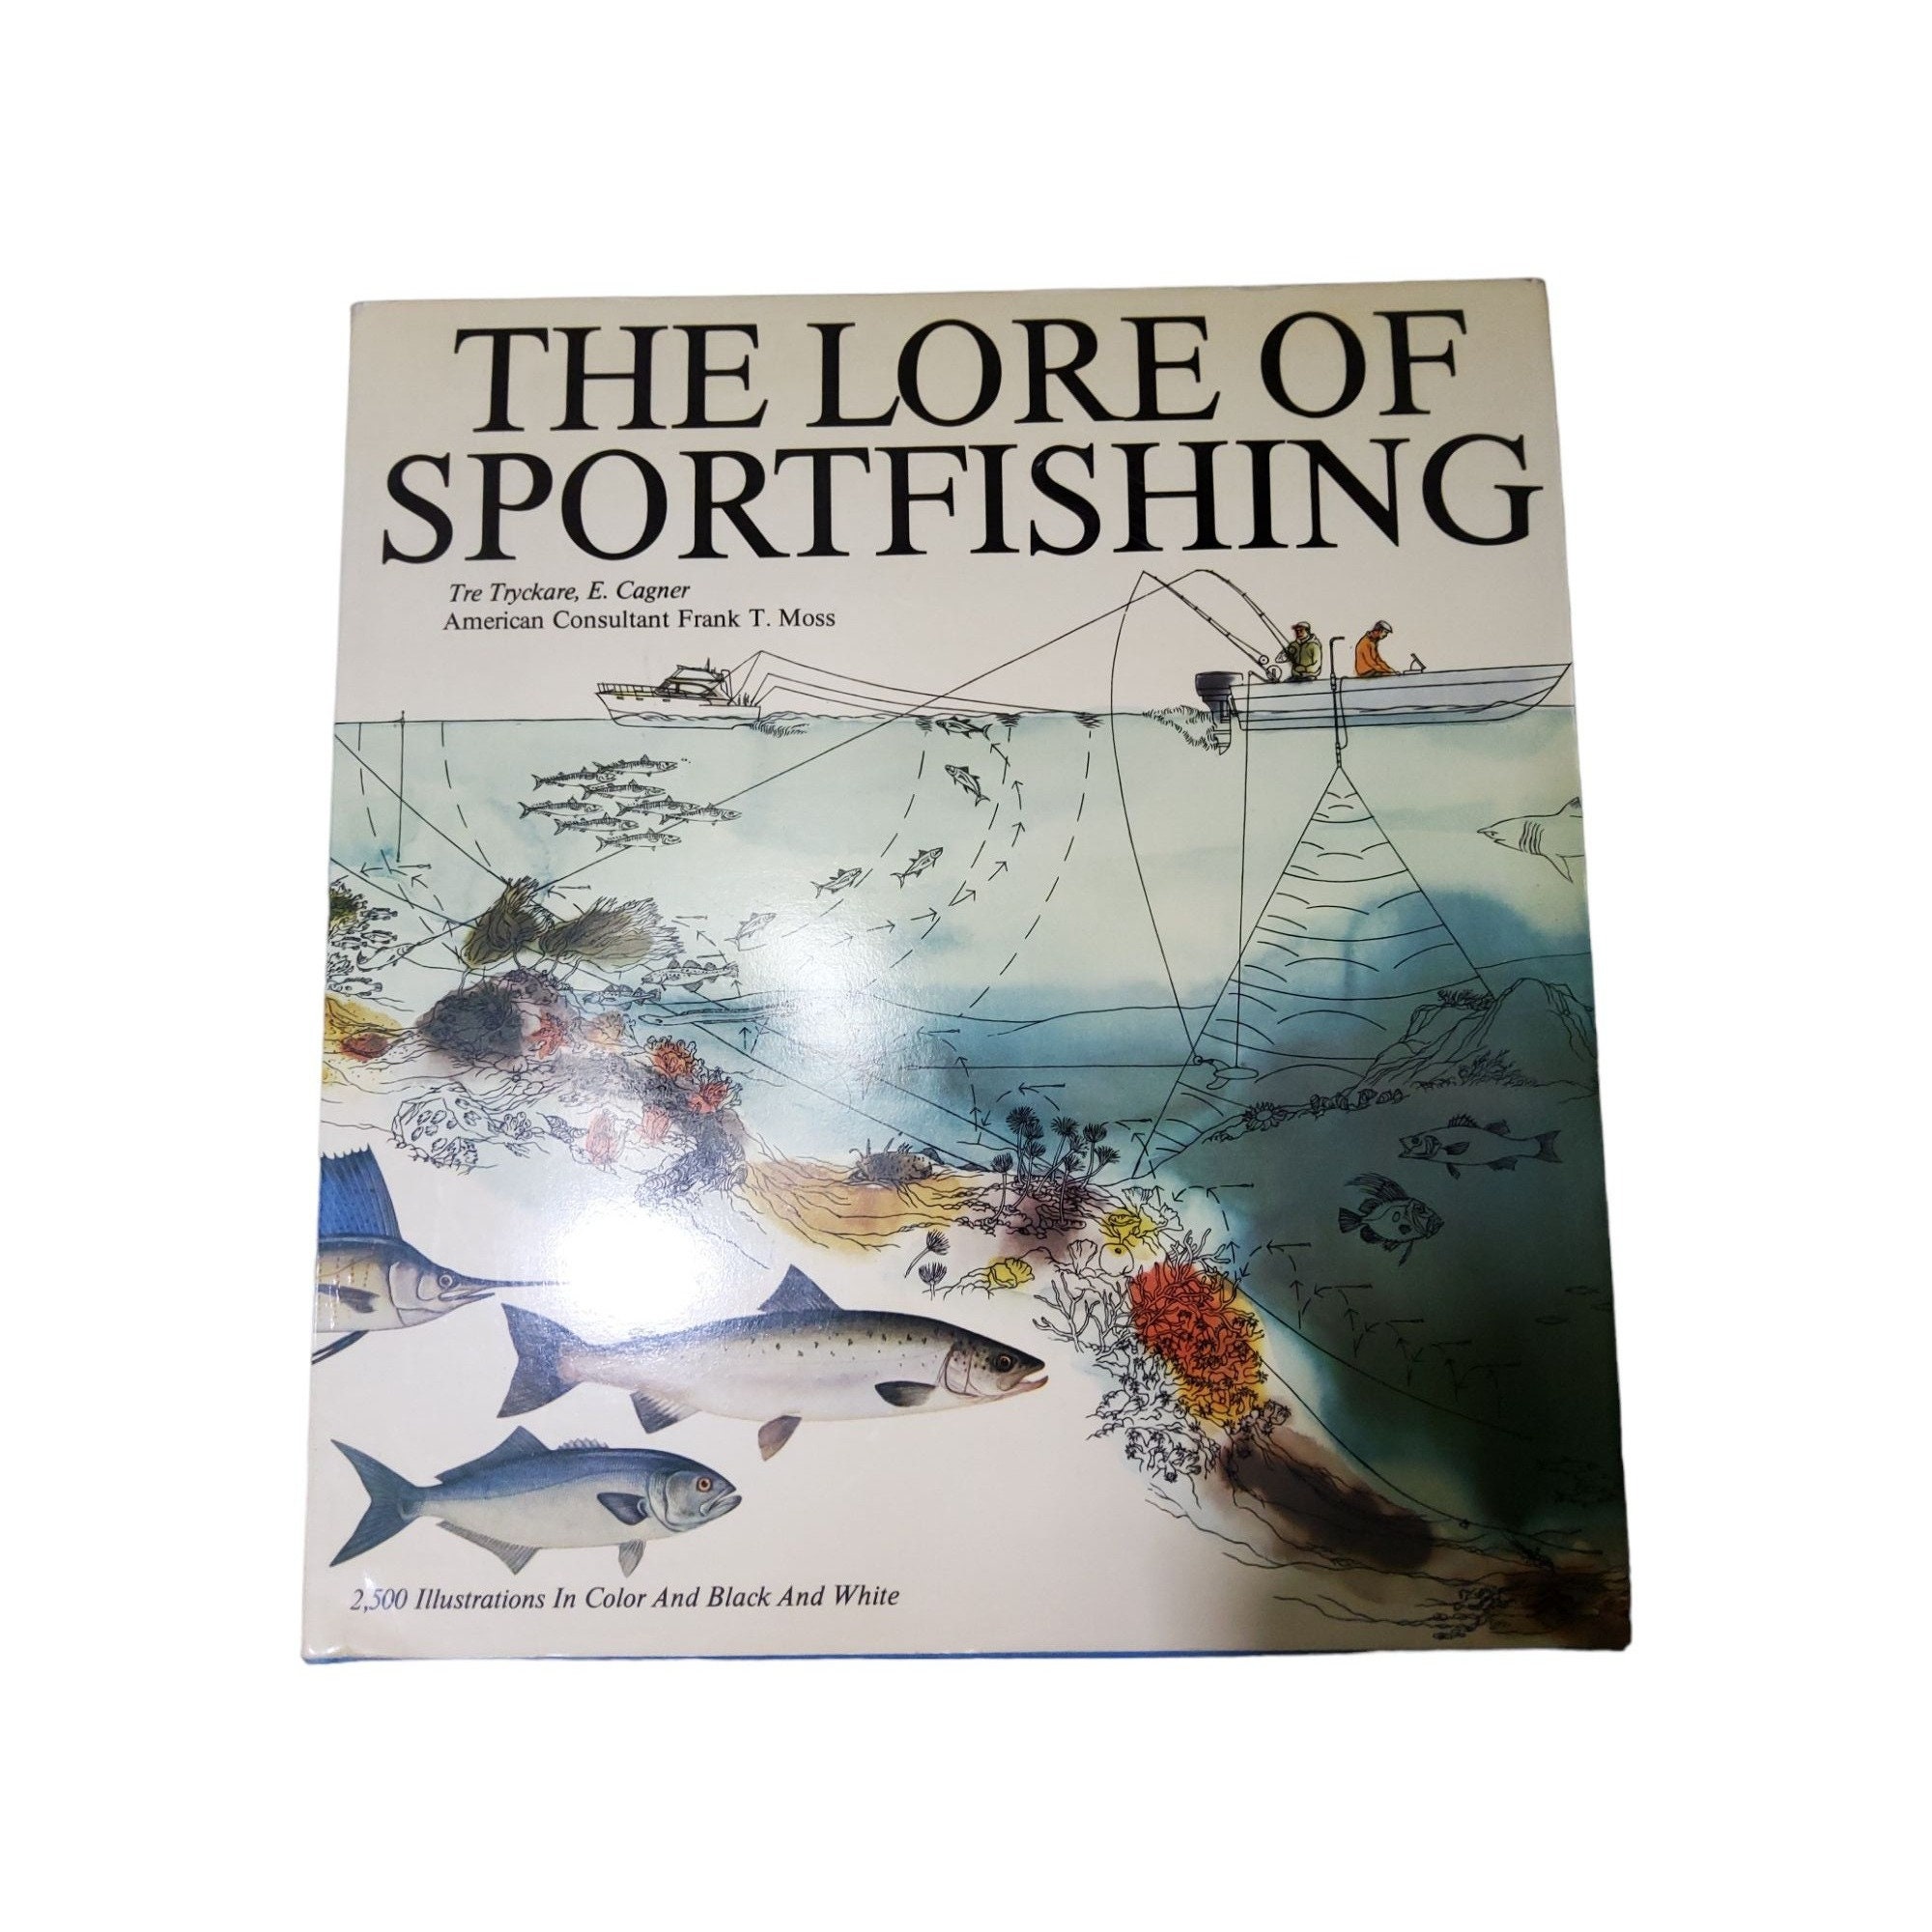 Vintage First Edition 1976 the Lore of Sportfishing by Tre Tryckare Book. -   UK